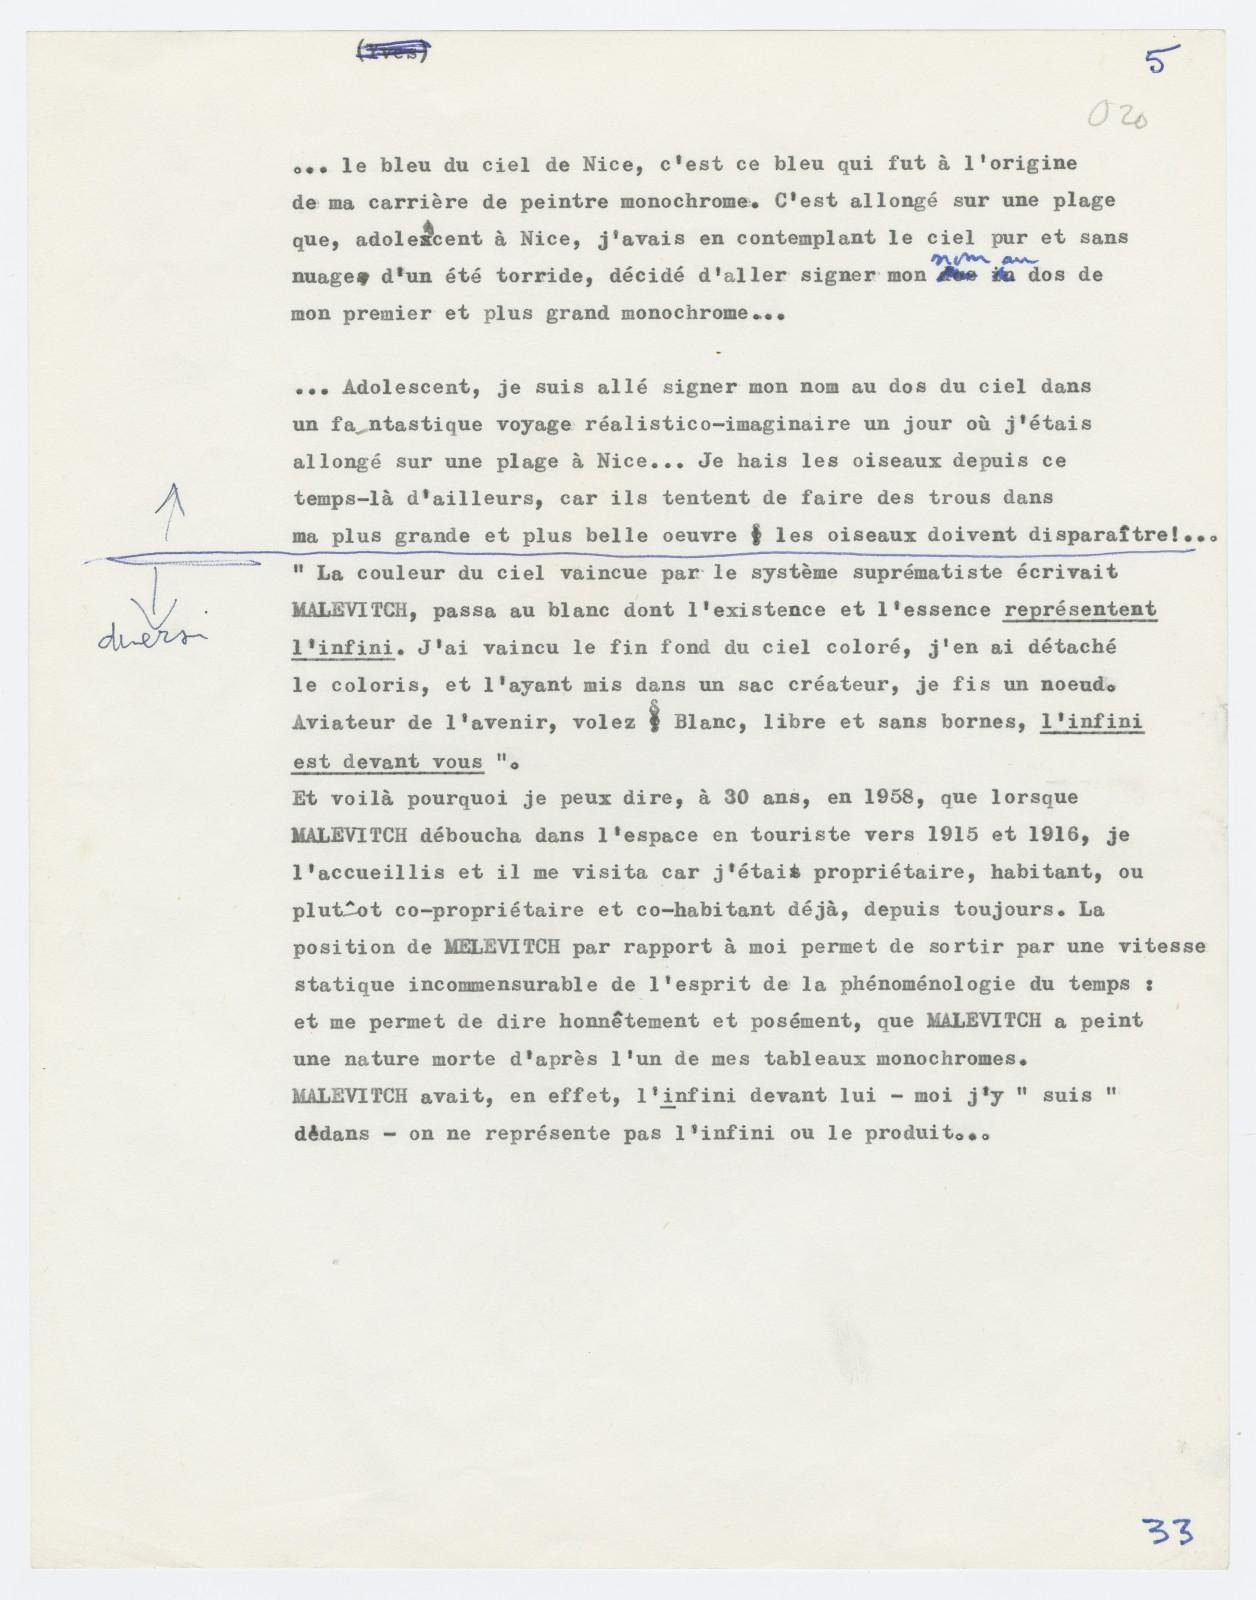 Yves Klein, Note about the differences between Malevitch's work and his